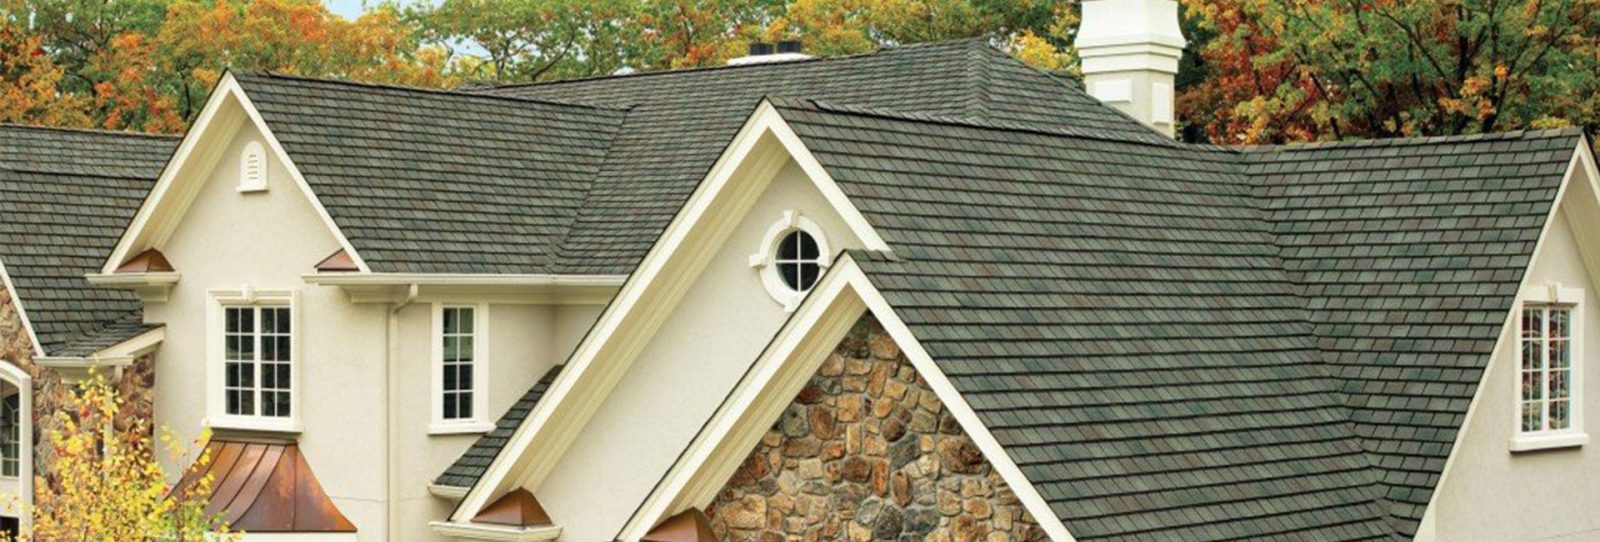 residential roofing types